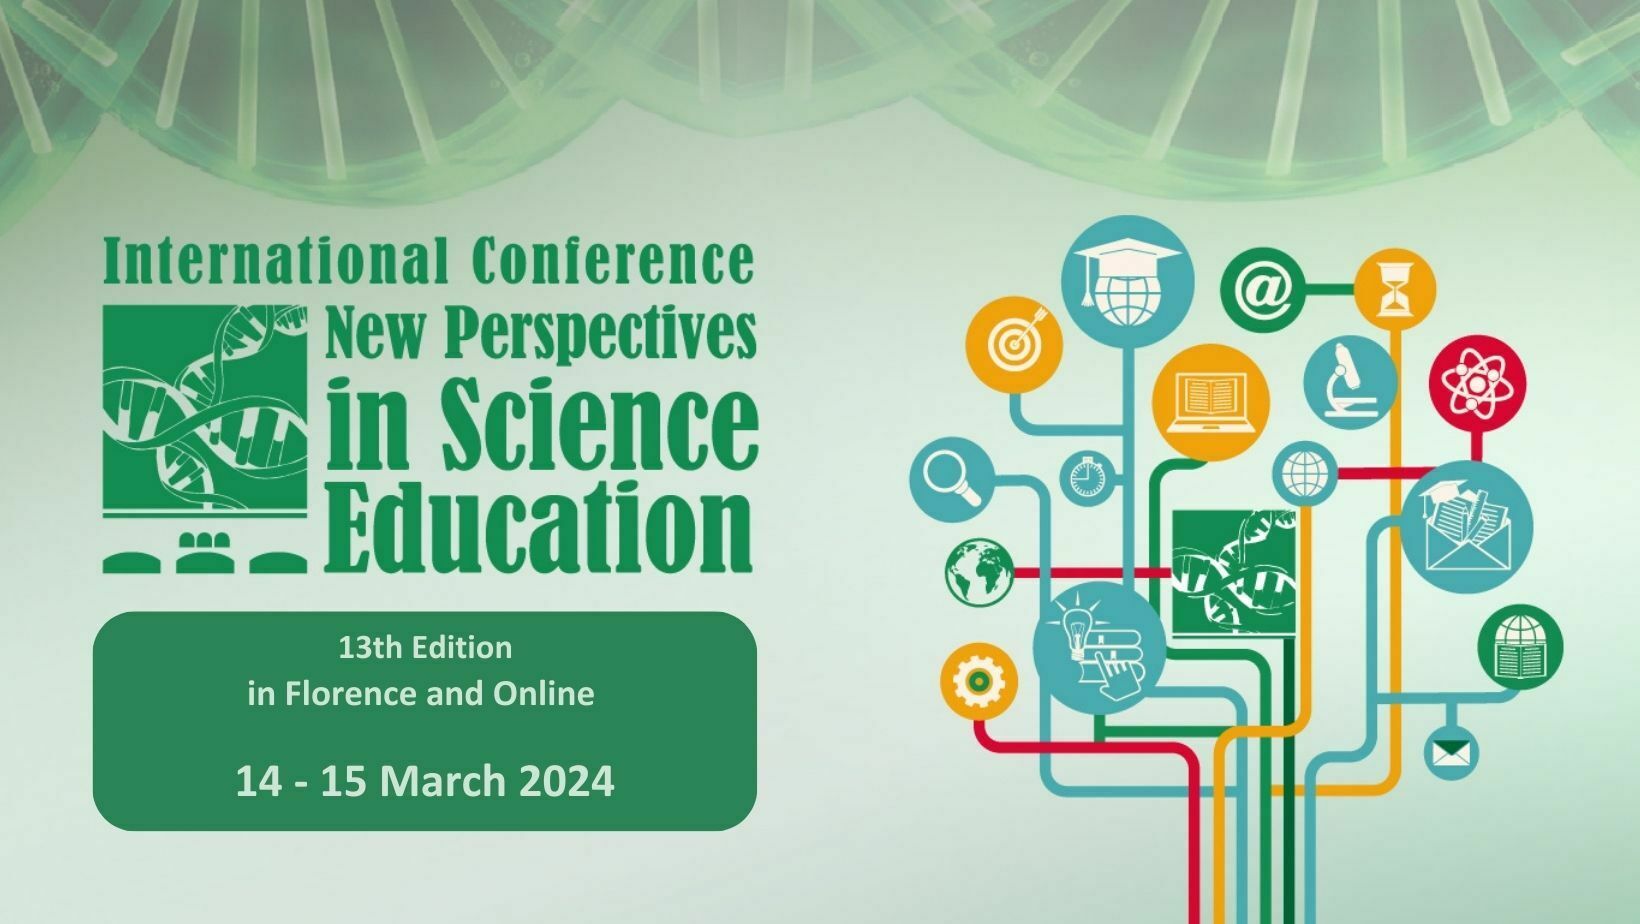 NPSE 2024 | New Perspectives in Science Education 13th Edition - International Conference